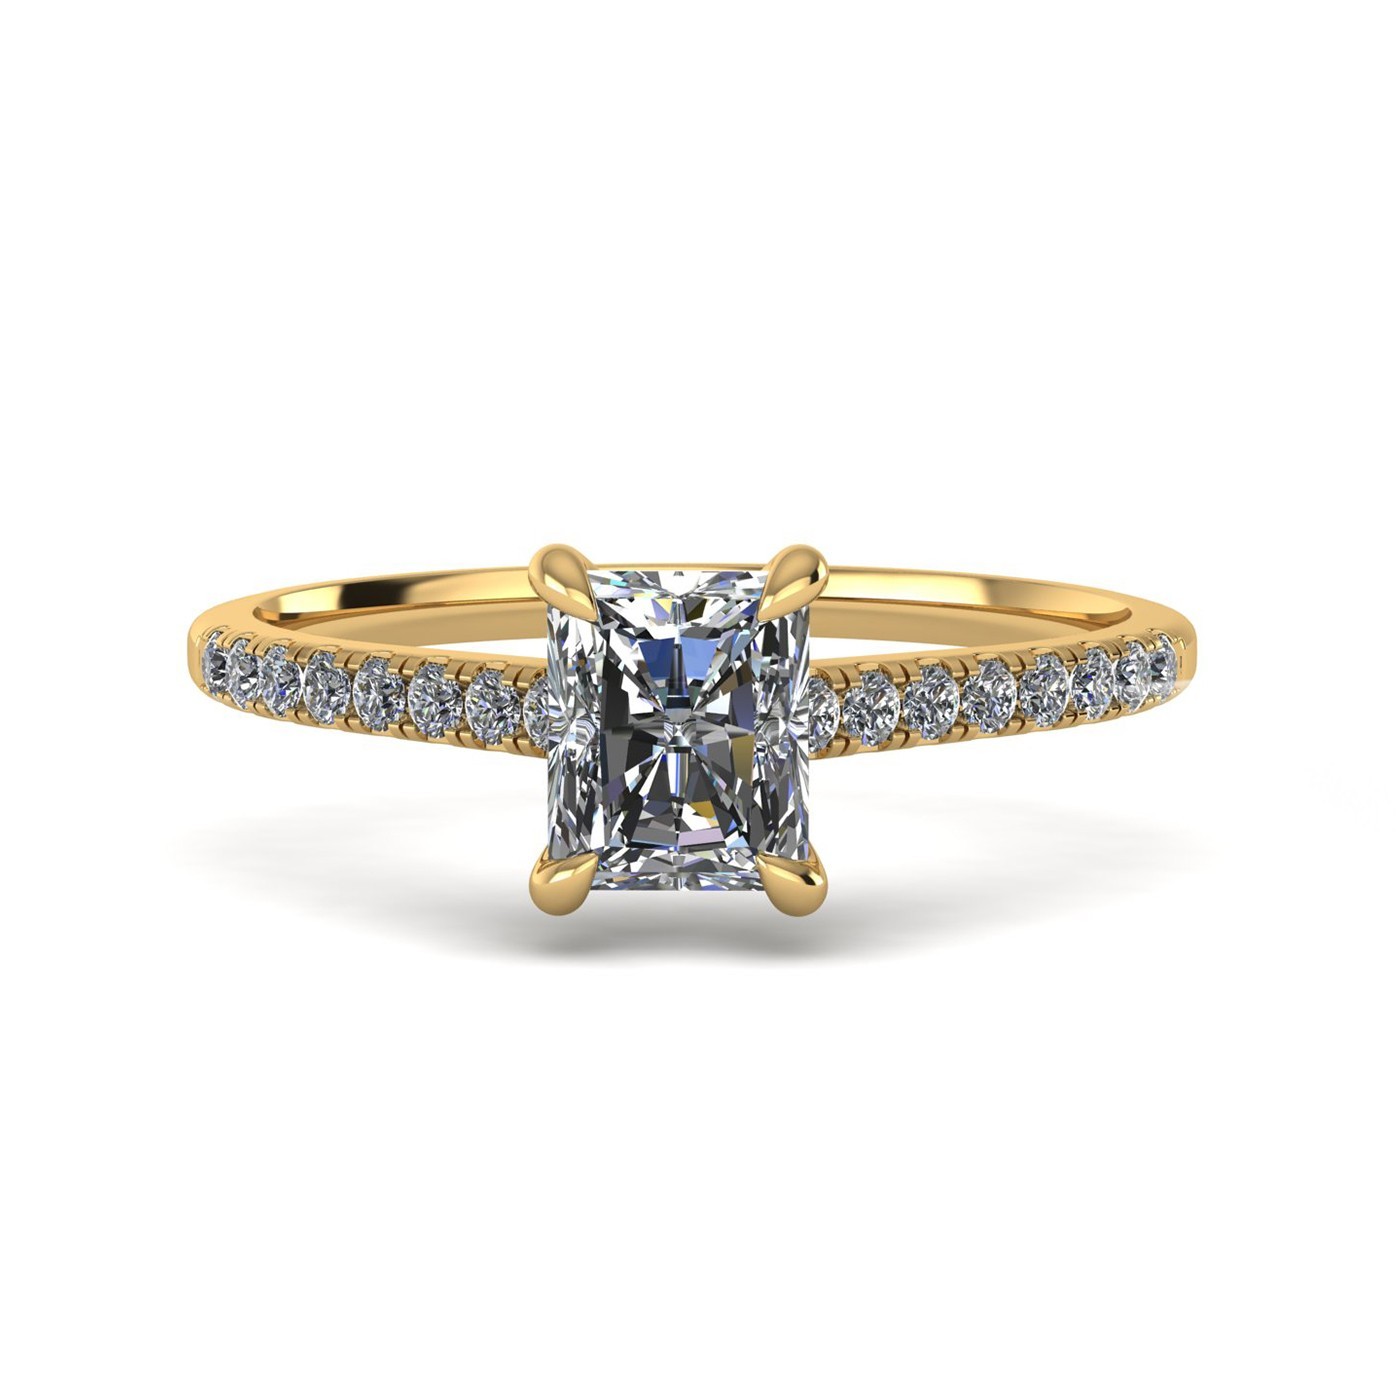 18k yellow gold  2,00 ct 4 prongs radiant cut diamond engagement ring with whisper thin pavÉ set band Photos & images